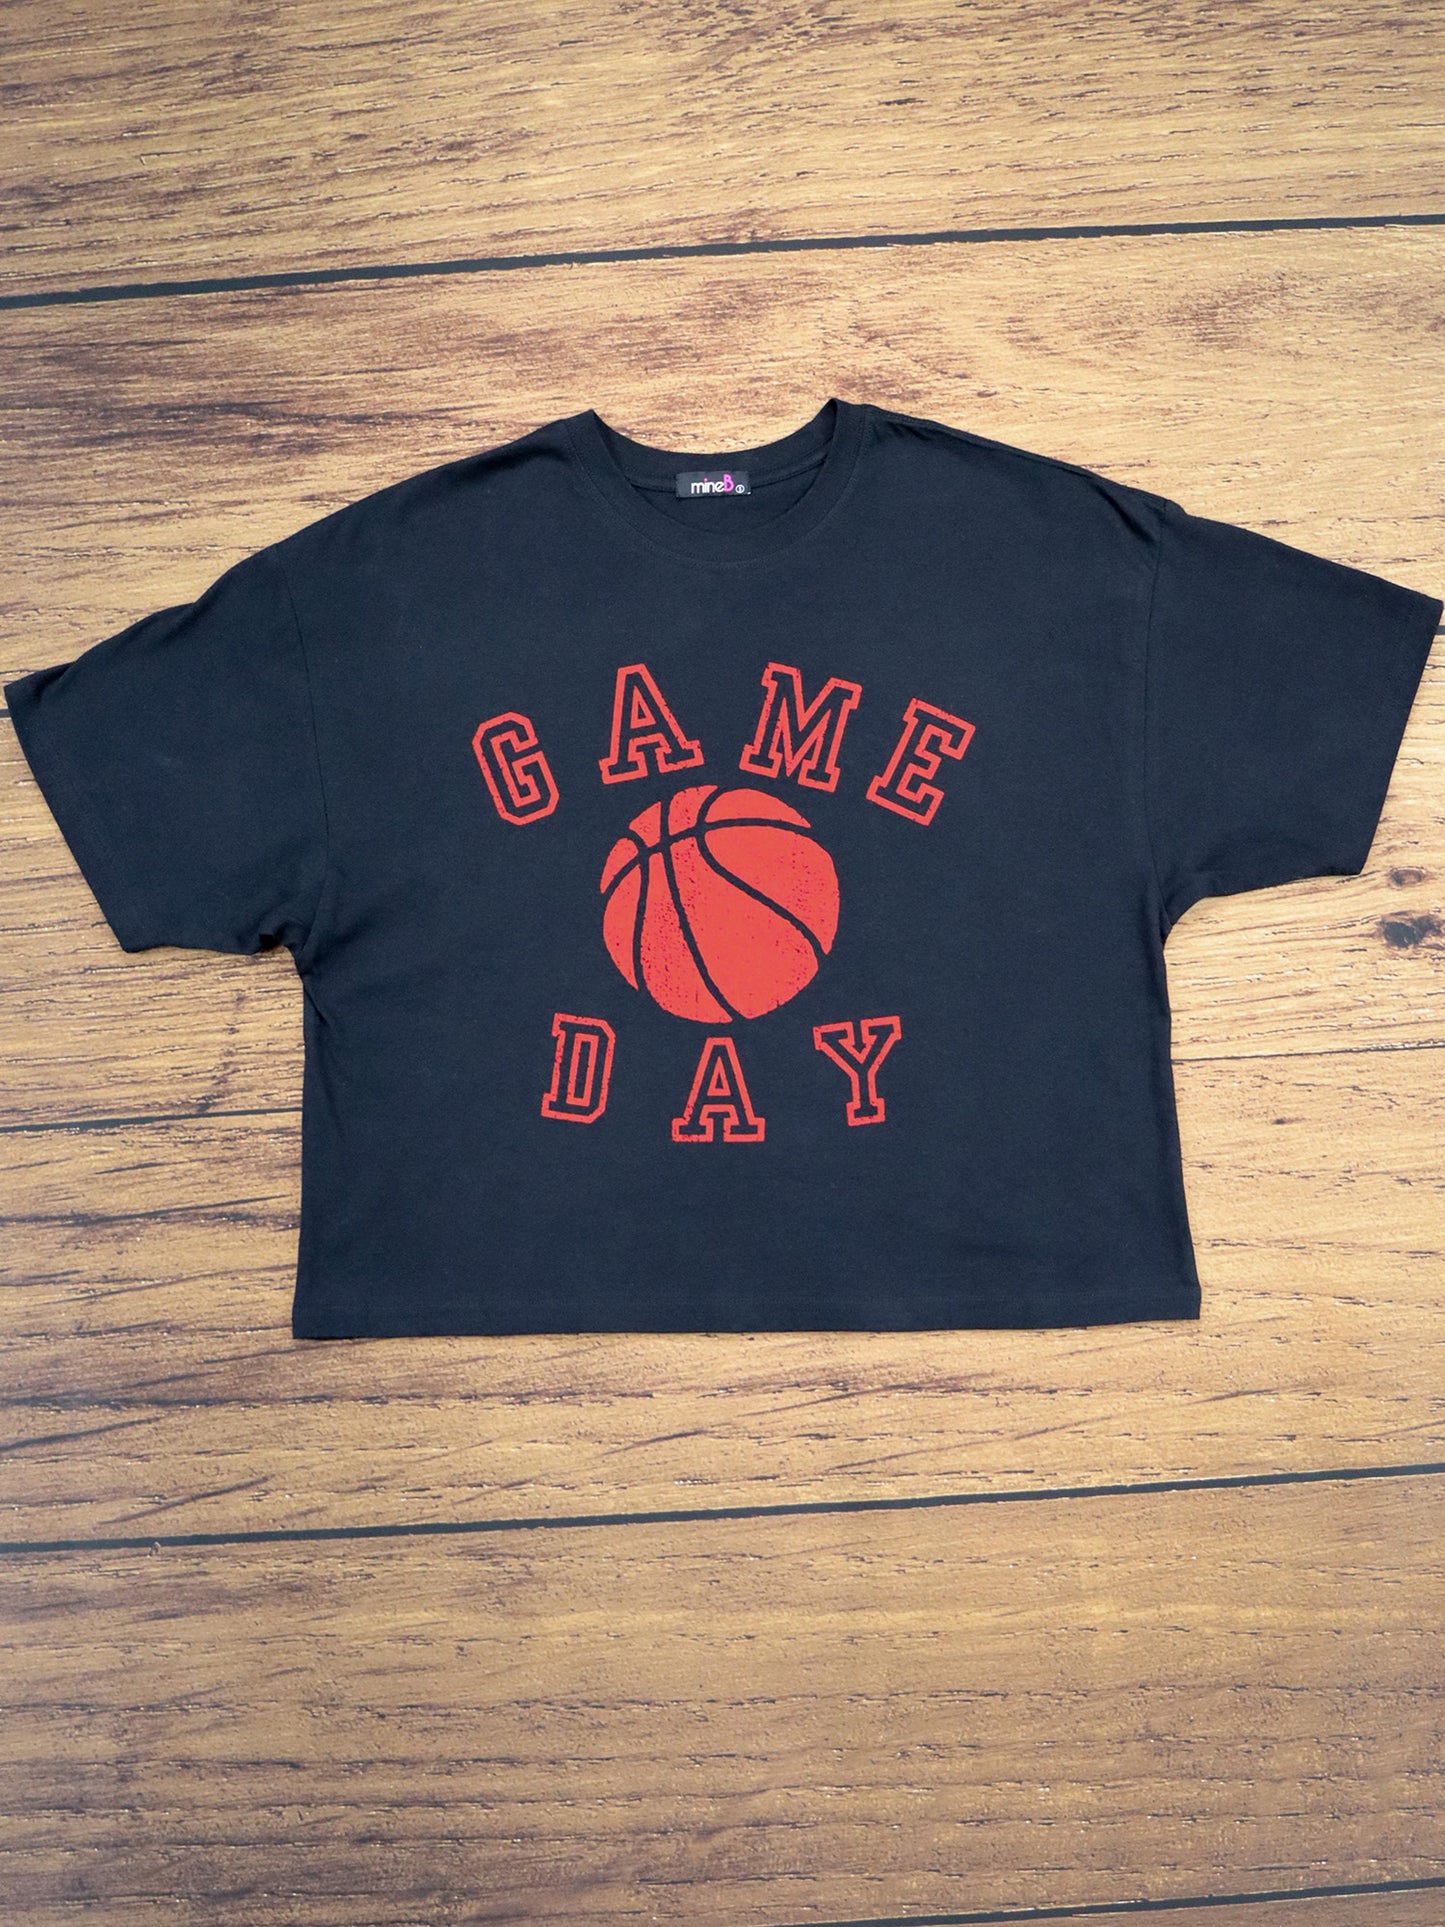 Basketball Game Day- Crop Top- Black/Red